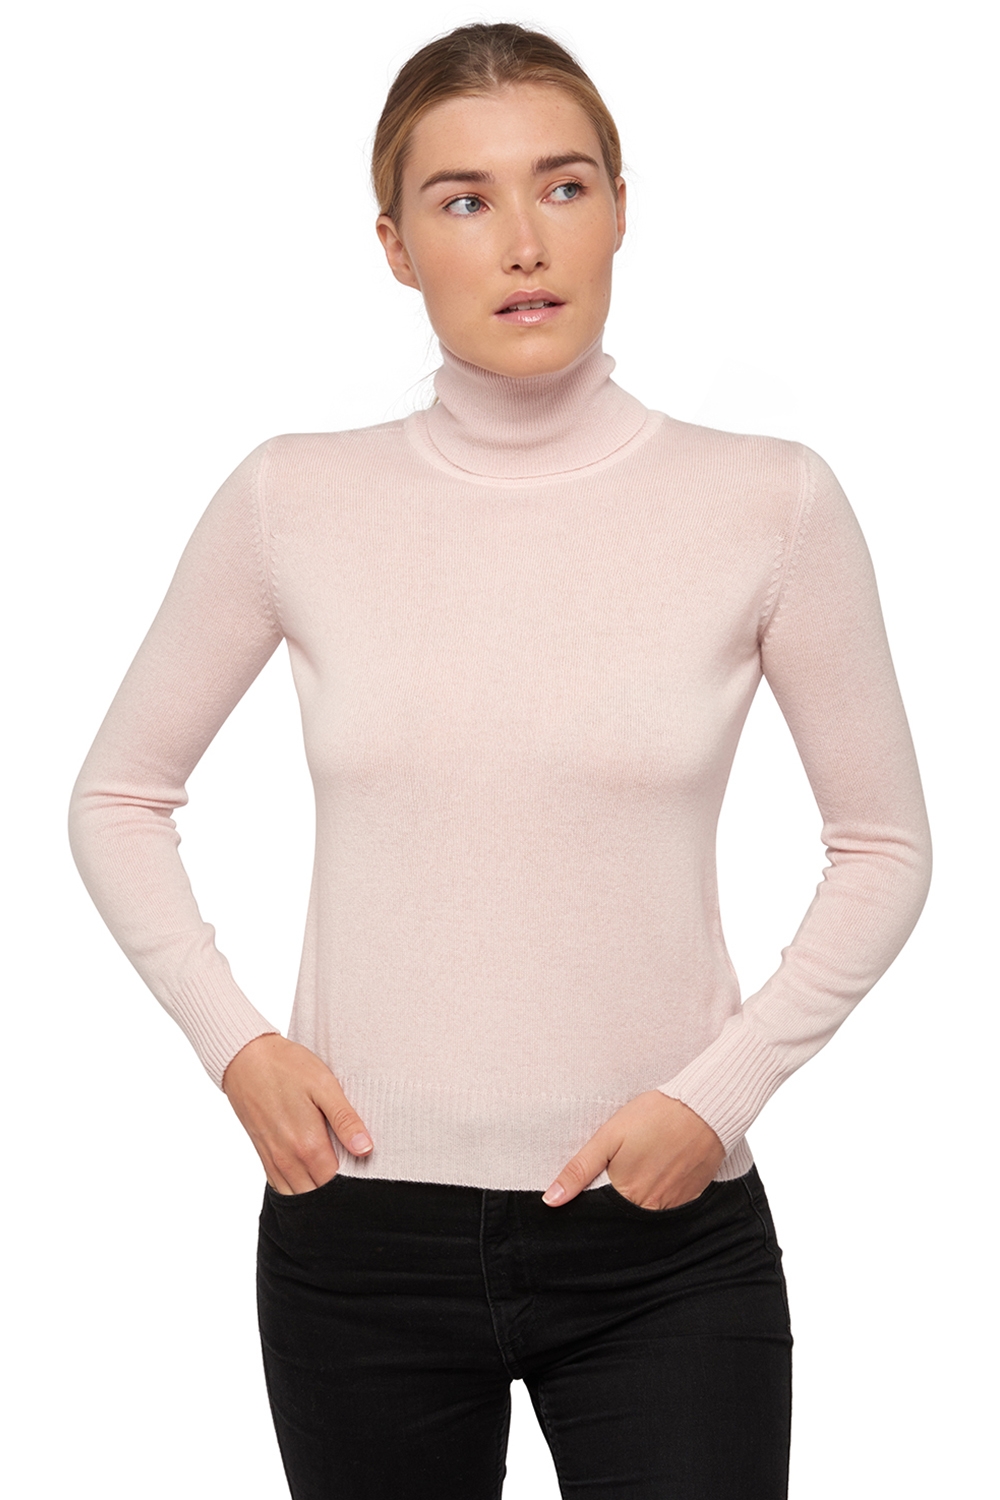 Cachemire pull femme col roule lili rose pale m